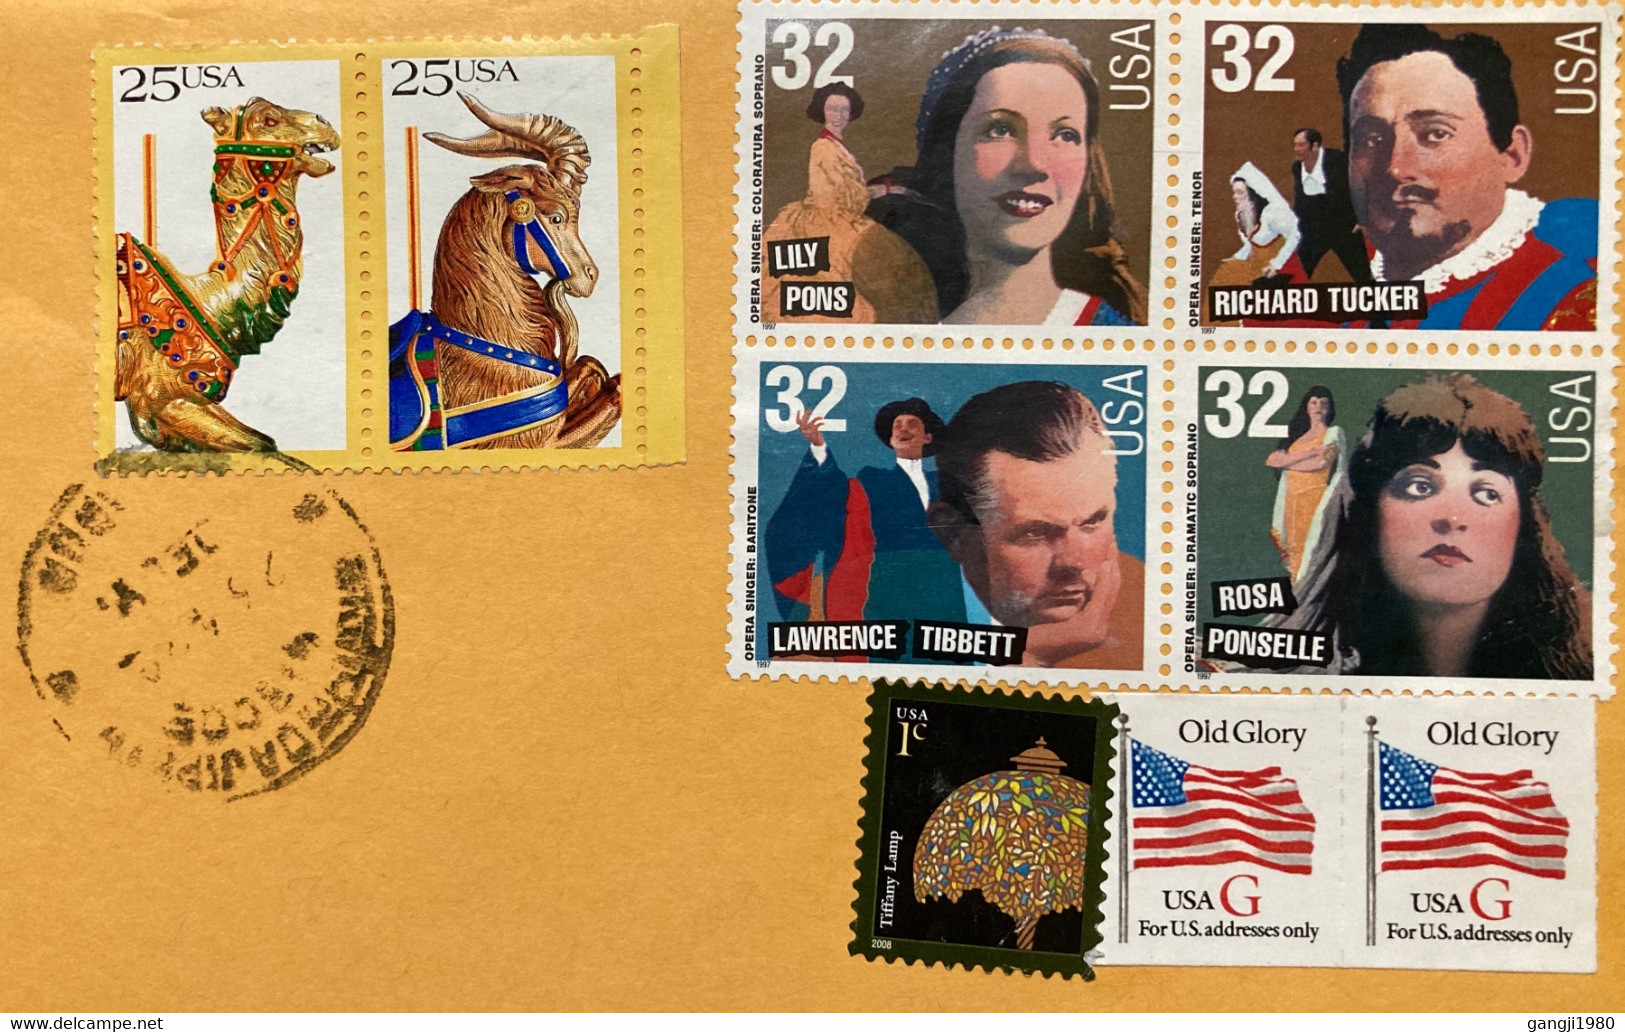 USA 2022,CAMEL ,HORSE,DEER ,OPERA SINGER 4 DIFFERENT FAMOUS,FLAG ,LAMP 9 STAMPS COVER TO INDIA - Brieven En Documenten